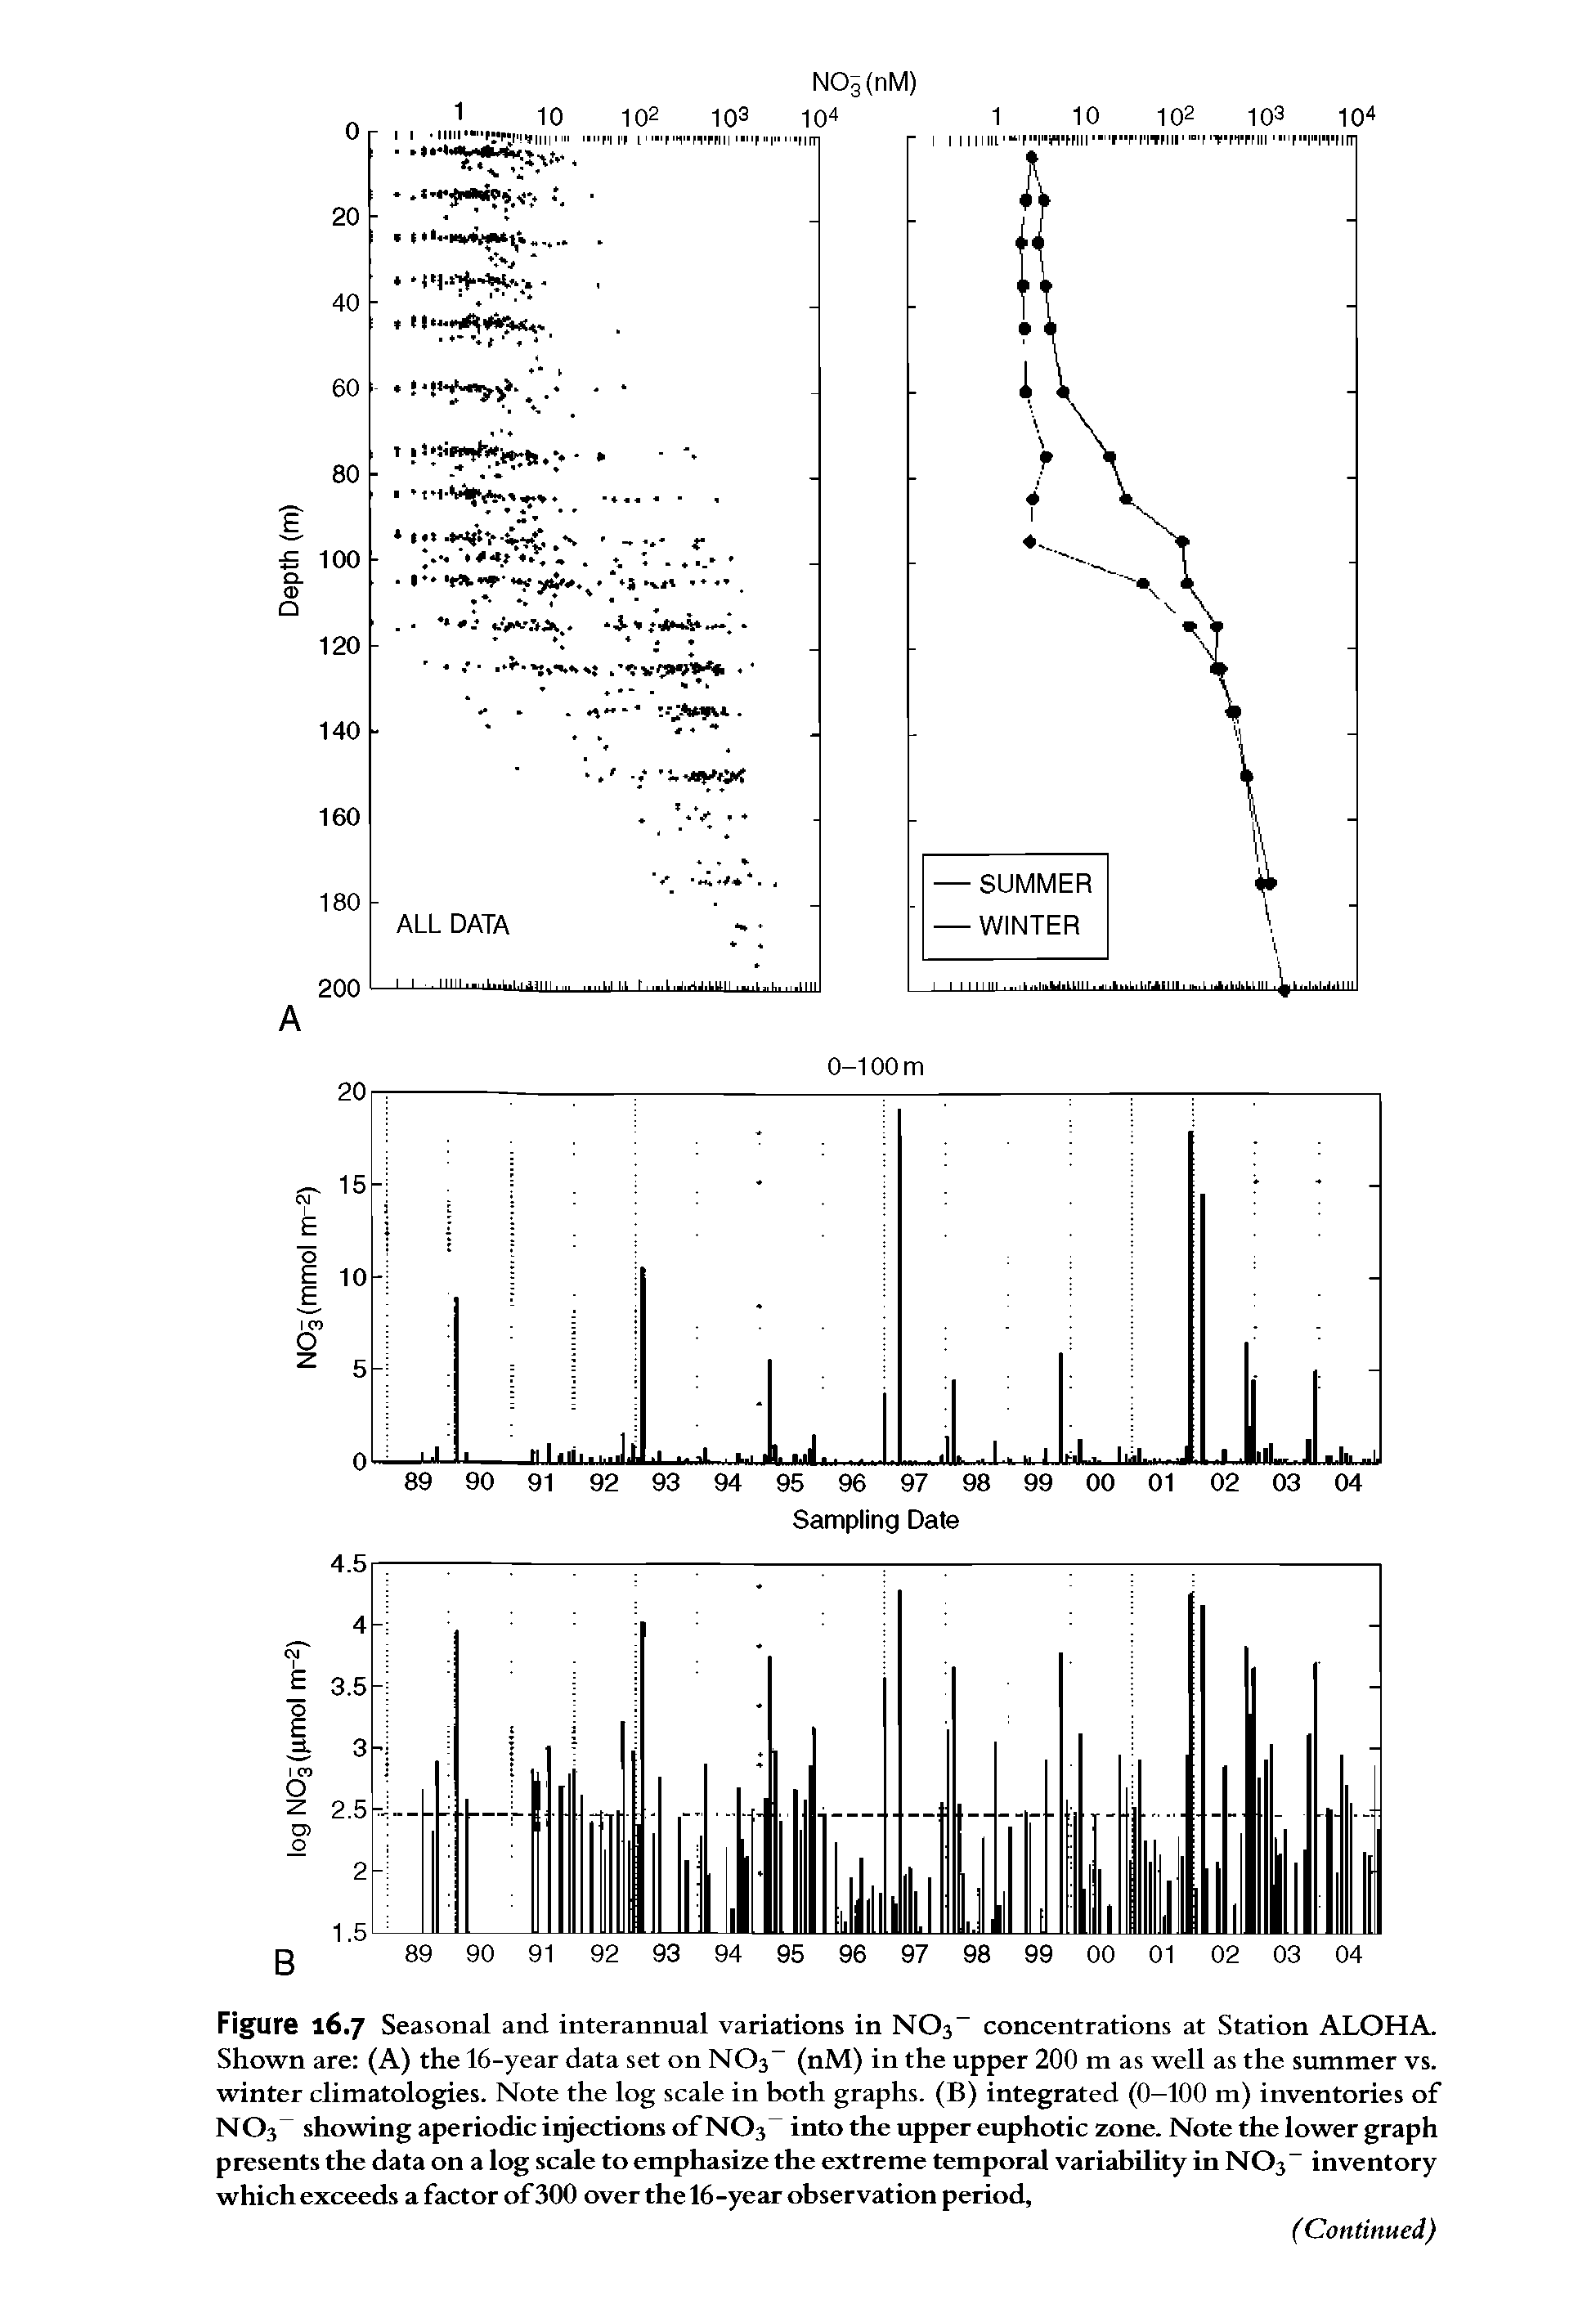 Figure 16.7 Seasonal and interannual variations in NOs concentrations at Station ALOHA. Shown are (A) the 16-year data set on NOs (nM) in the upper 200 m as well as the summer vs. winter climatologies. Note the log scale in both graphs. (B) integrated (0-100 m) inventories of NO3 showing aperiodic irgections of NO3 into the upper euphotic zone. Note the lower graph presents the data on a log scale to emphasize the extreme temporal variability in N03 inventory which exceeds a factor of300 over the 16-year observation period,...